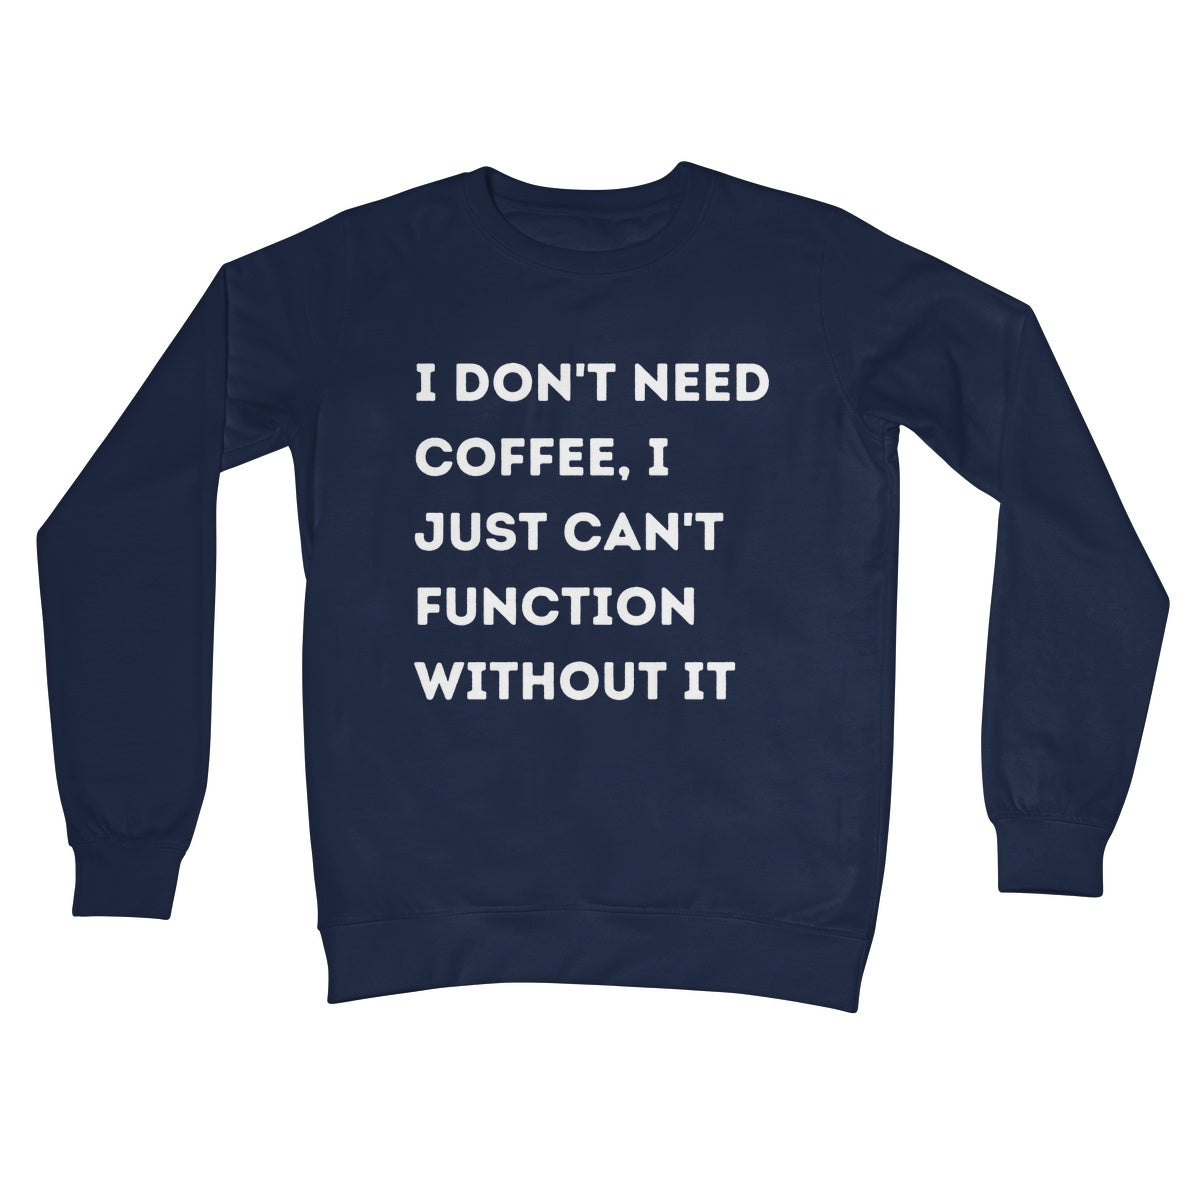 I can't function without coffee jumper navy